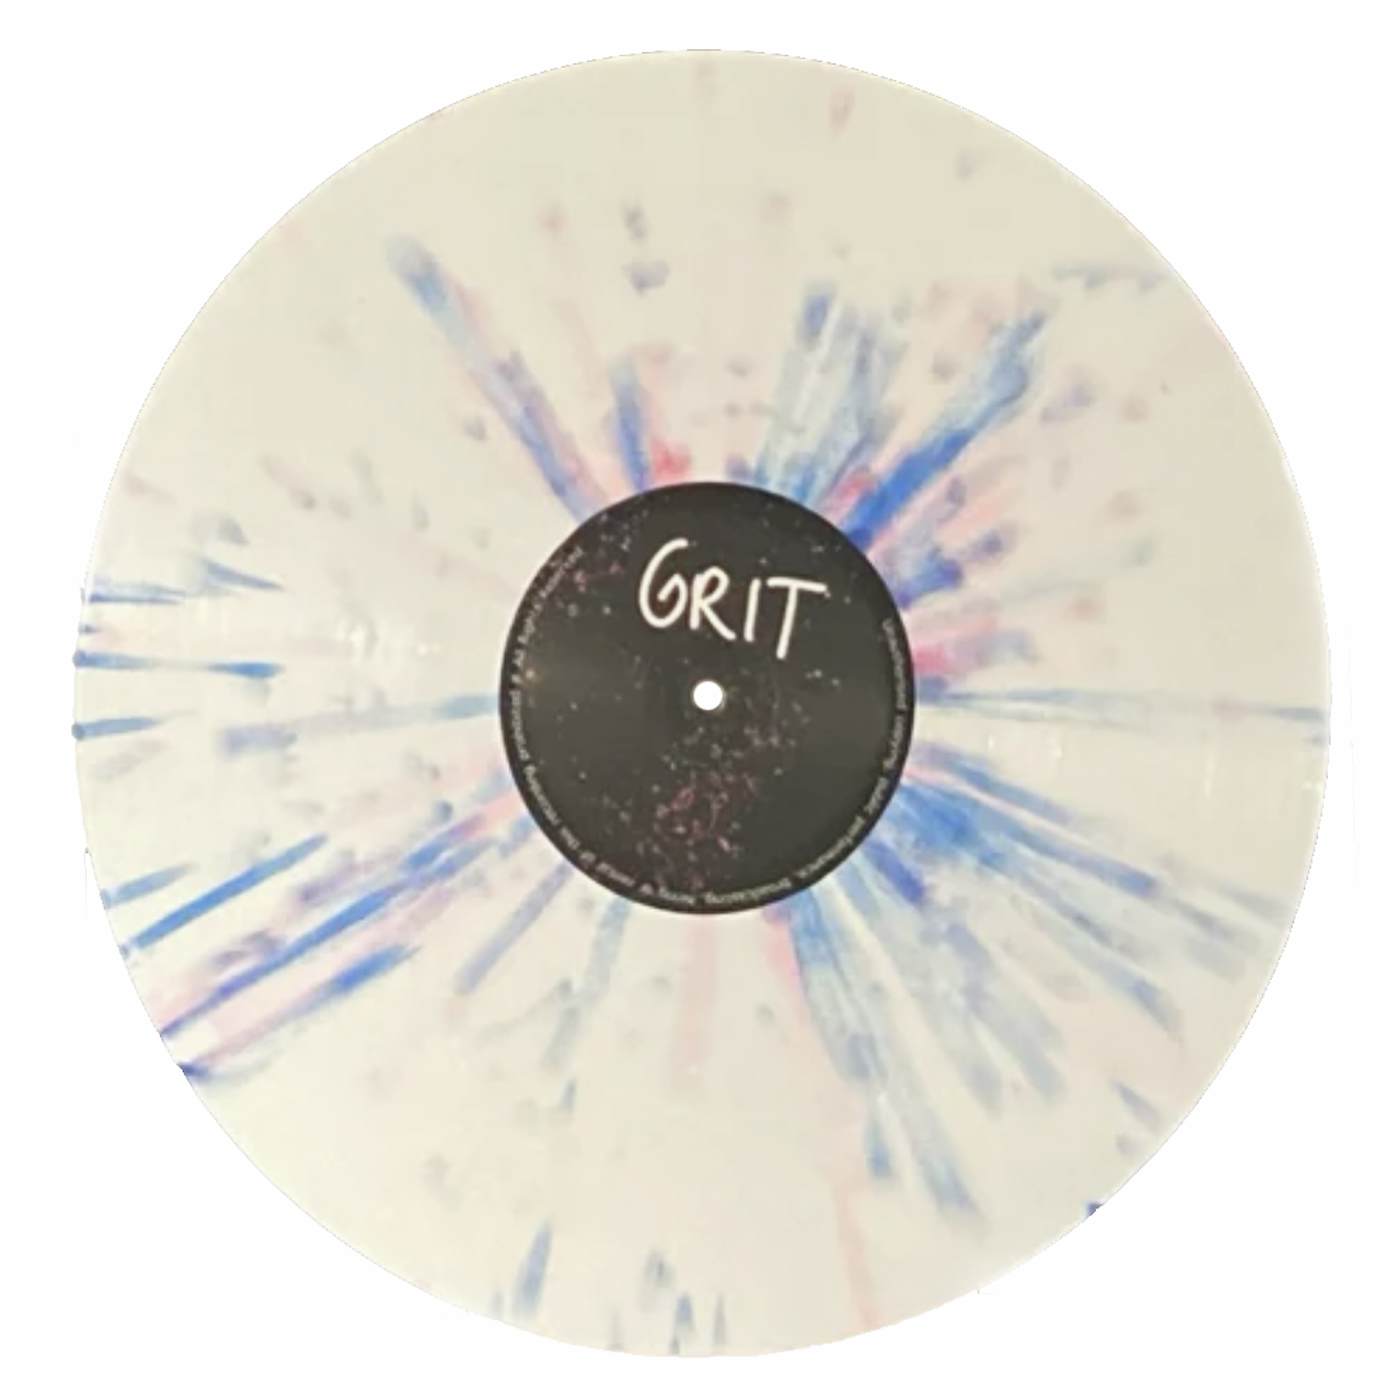 The Kut 'GRIT' 12" Limited to 100 Copies (Vinyl)